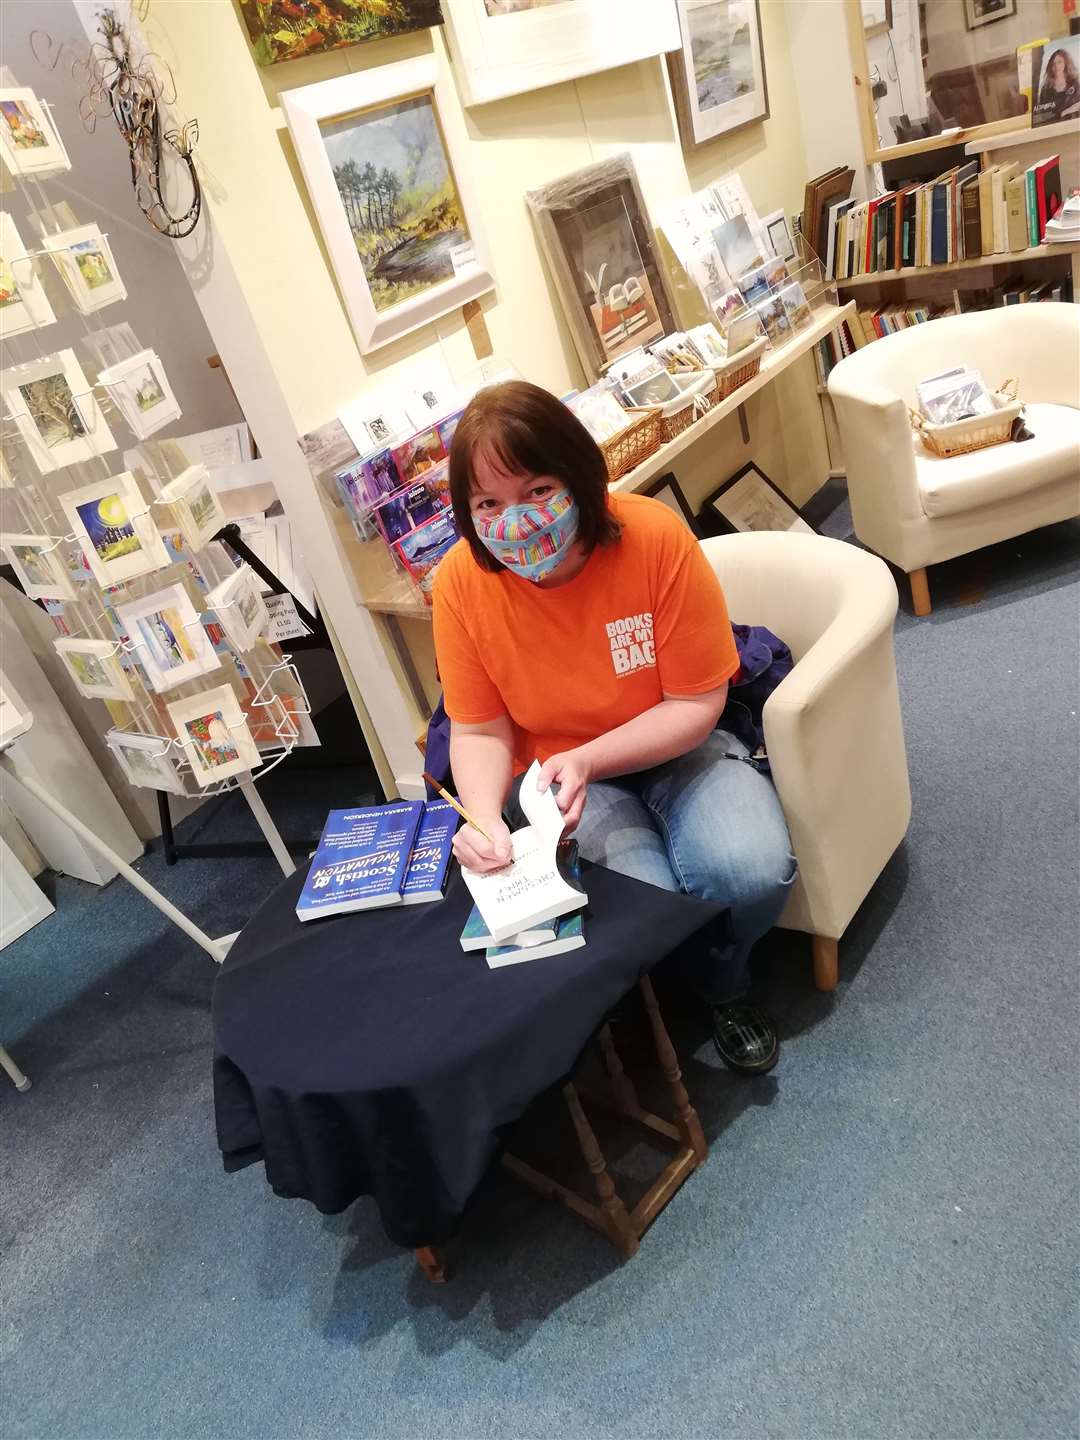 Barbara signing her books at Picaresque Books and Galerie Fantoosh in Dingwall.